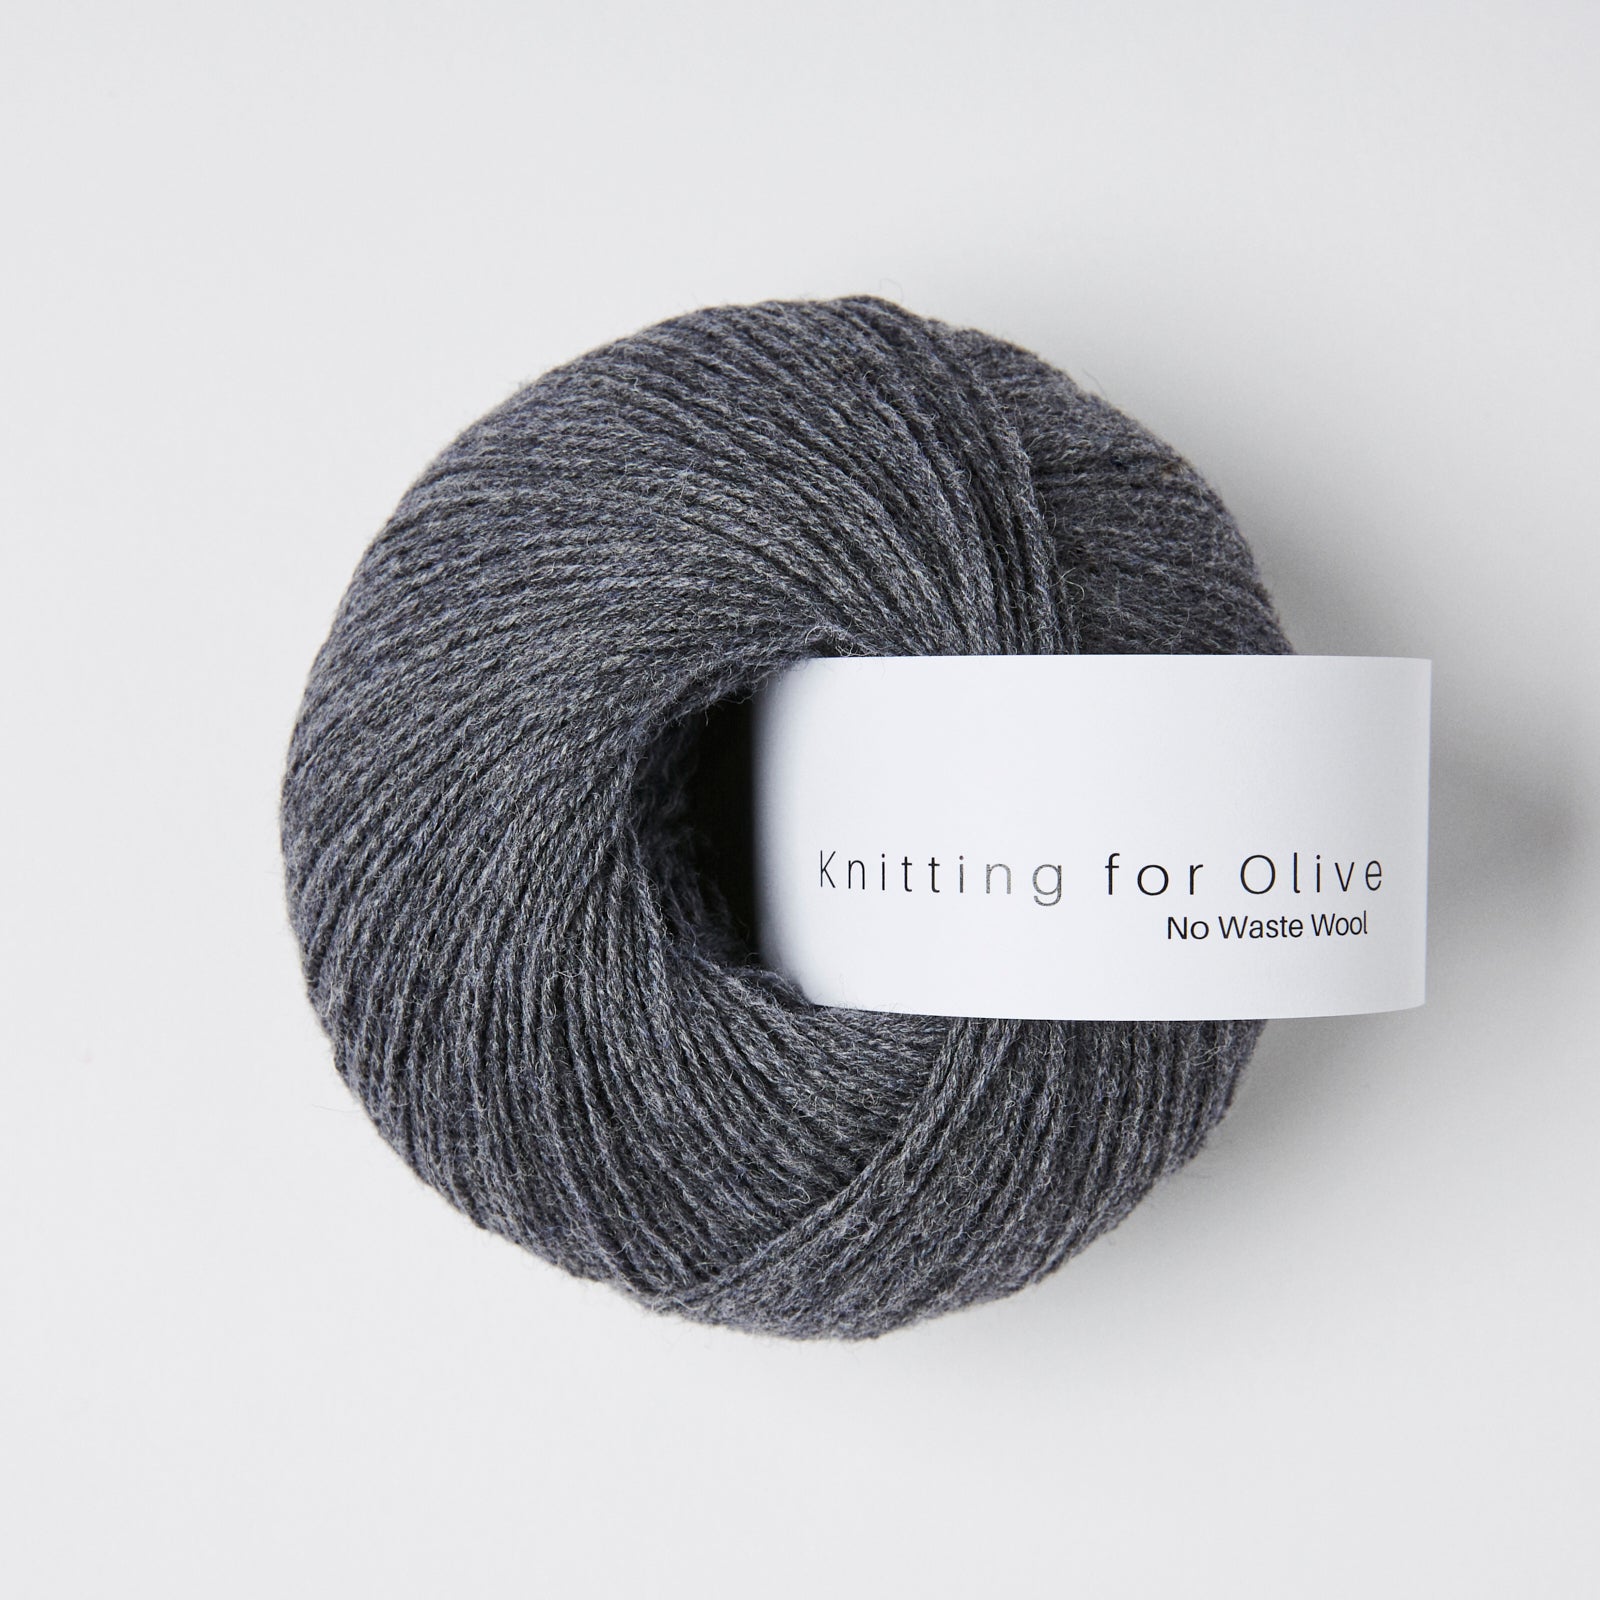 Knitting for Olive No Waste Wool - Thunder Cloud